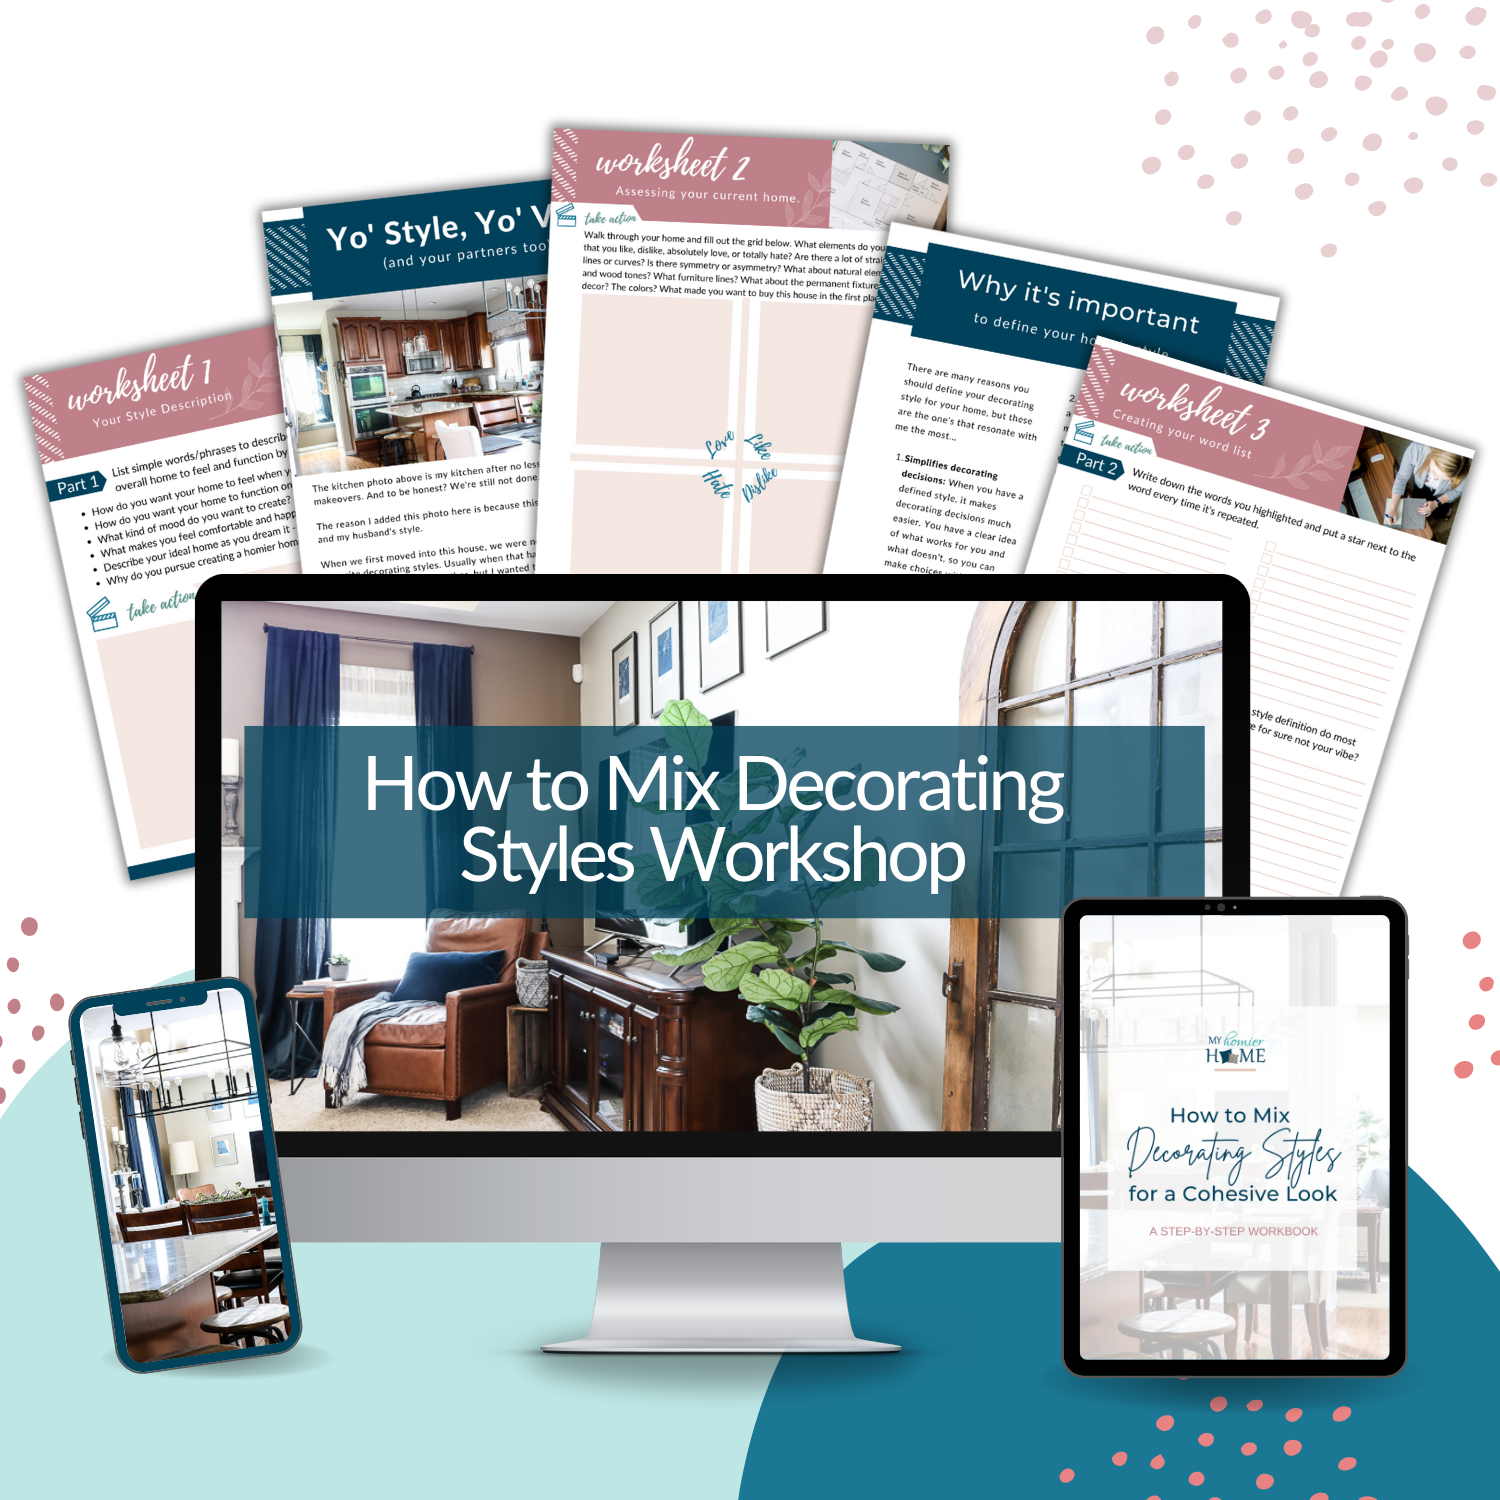 How to Mix Decorating Styles for a Cohesive Look Workshop